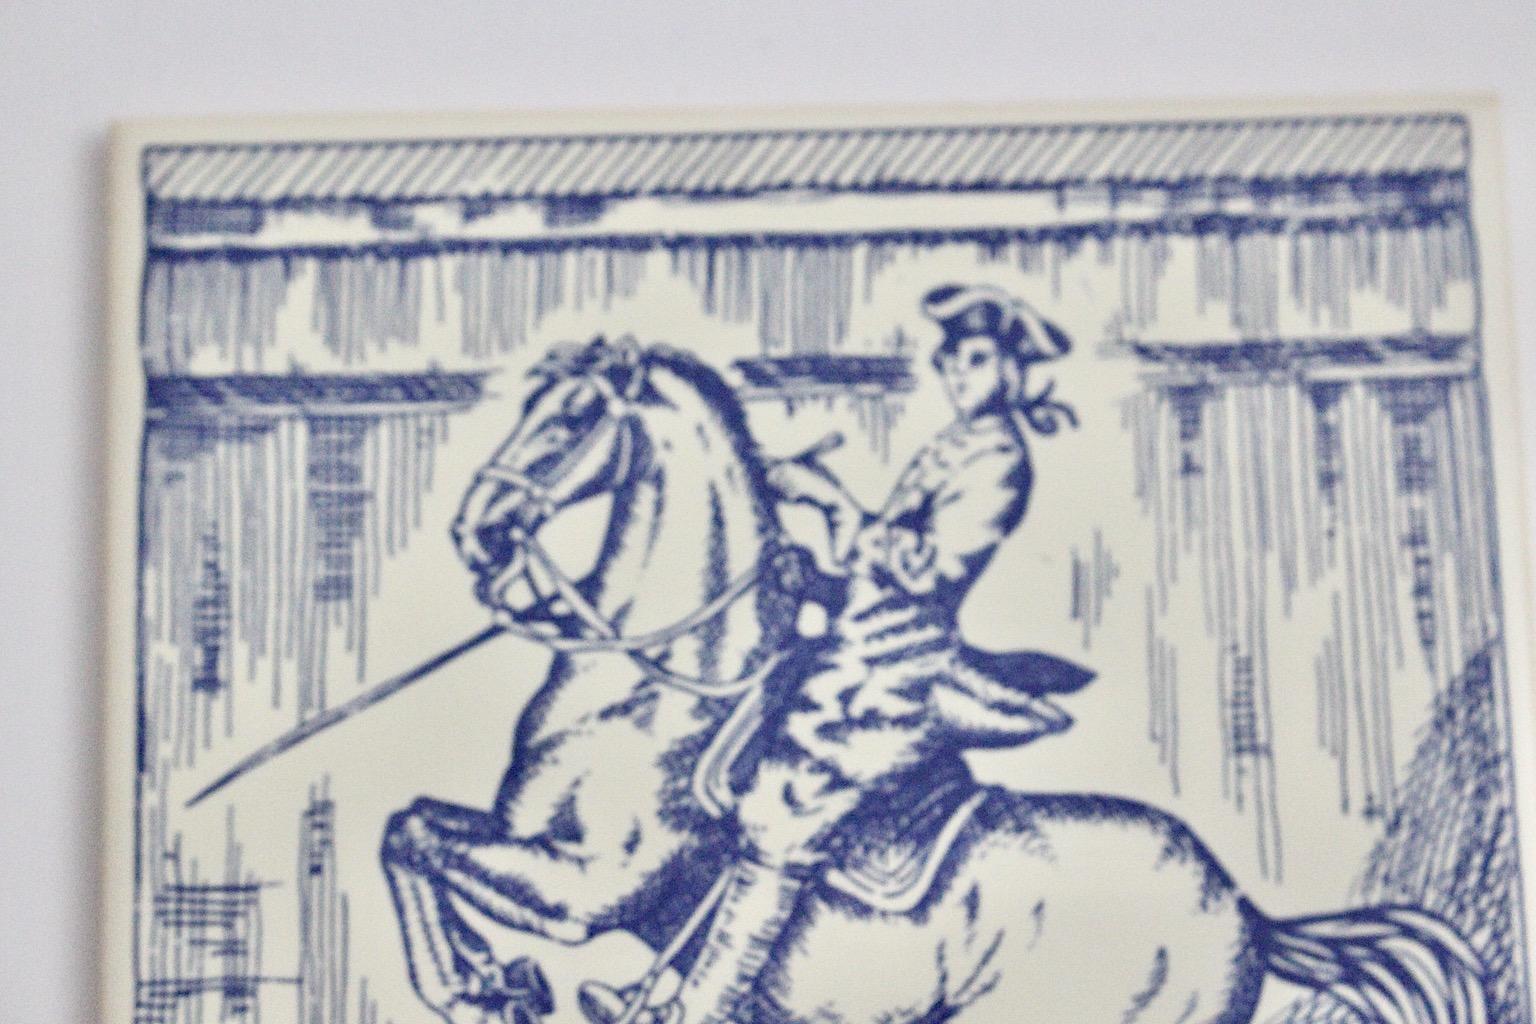 Mid-Century Modern vintage blue and white ceramic tile with motif.
Cavalier on Horseback 1960s, Austria.
A stunning ceramic tile with a printed motif in blue and white colors.
Labeled Made in Austria
Approx. measures:
Width 15.5 cm
Height 15.5